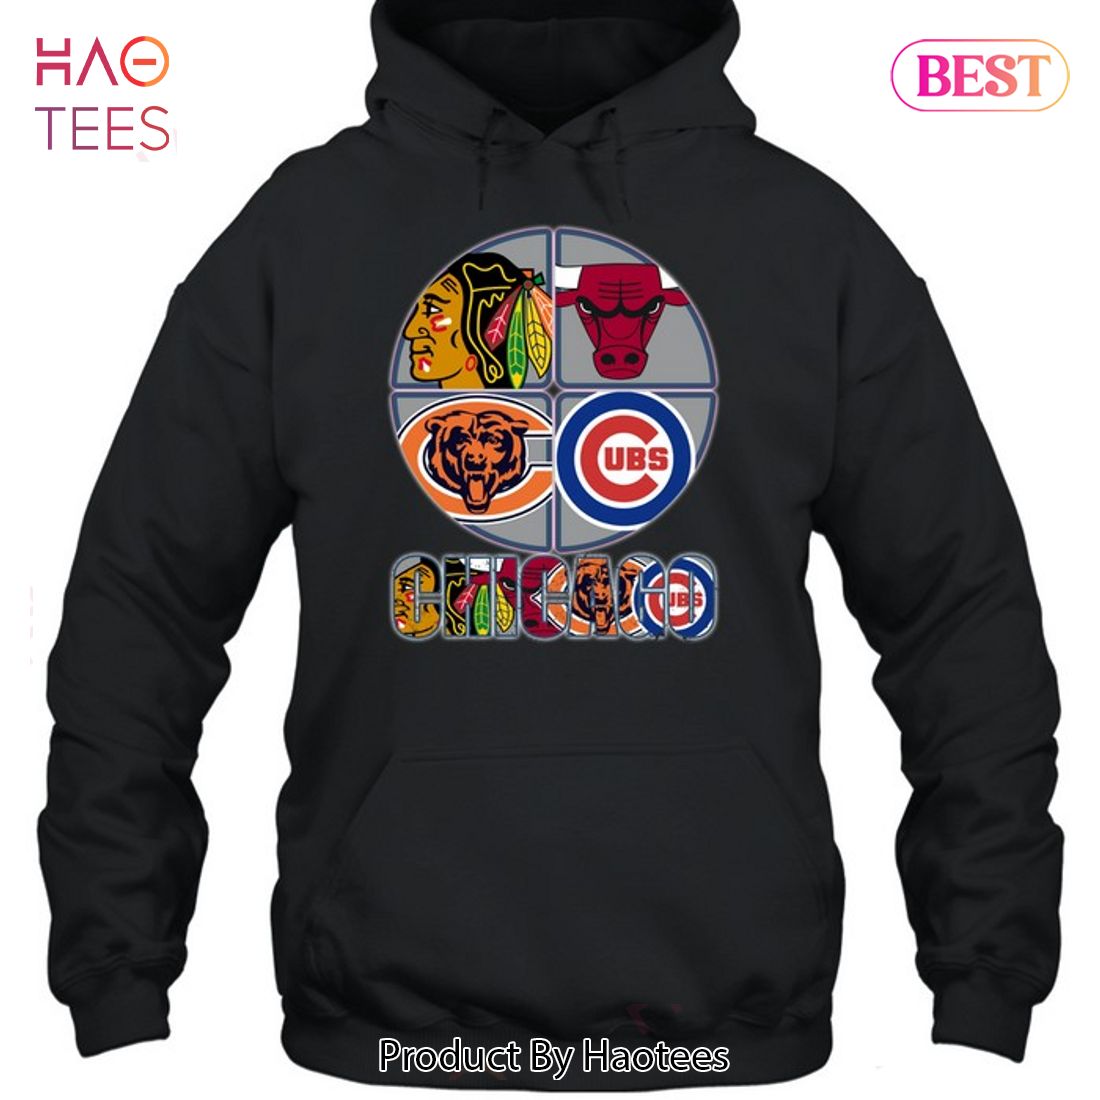 Holiday Gift Ideas for Chicago Sports Fans (Bears, Cubs, Bulls